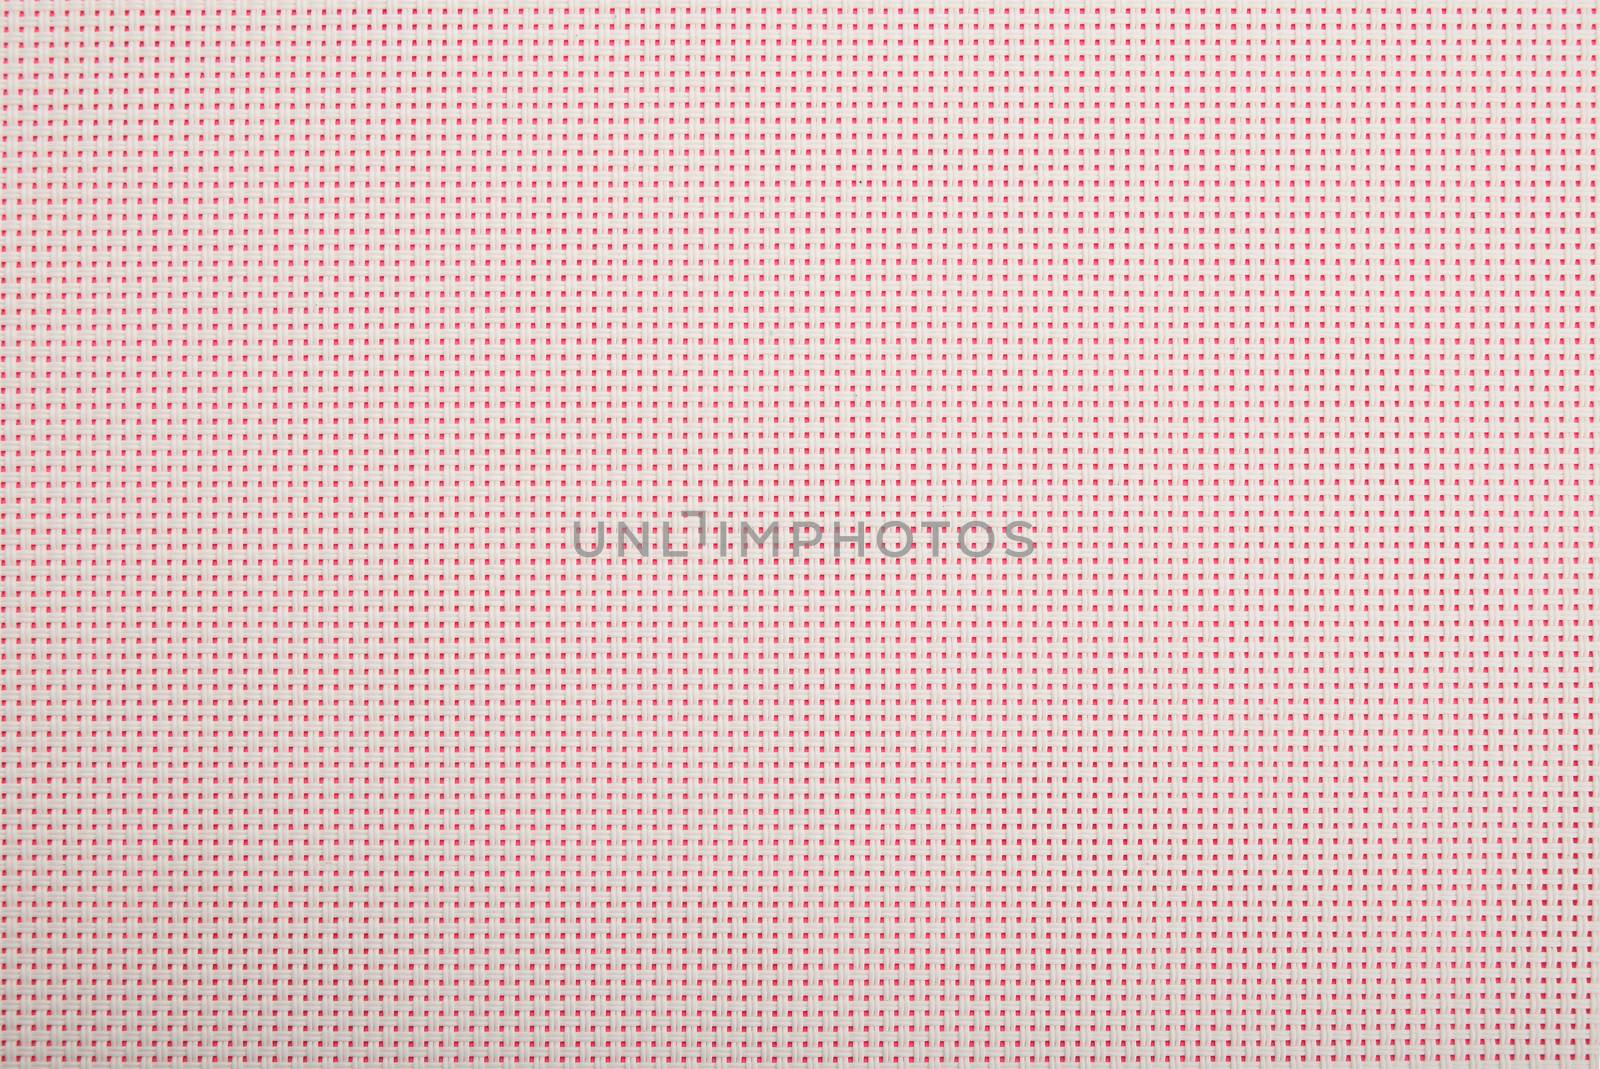 Background texture of white wicker braided plastic double strings with small mesh and pink back